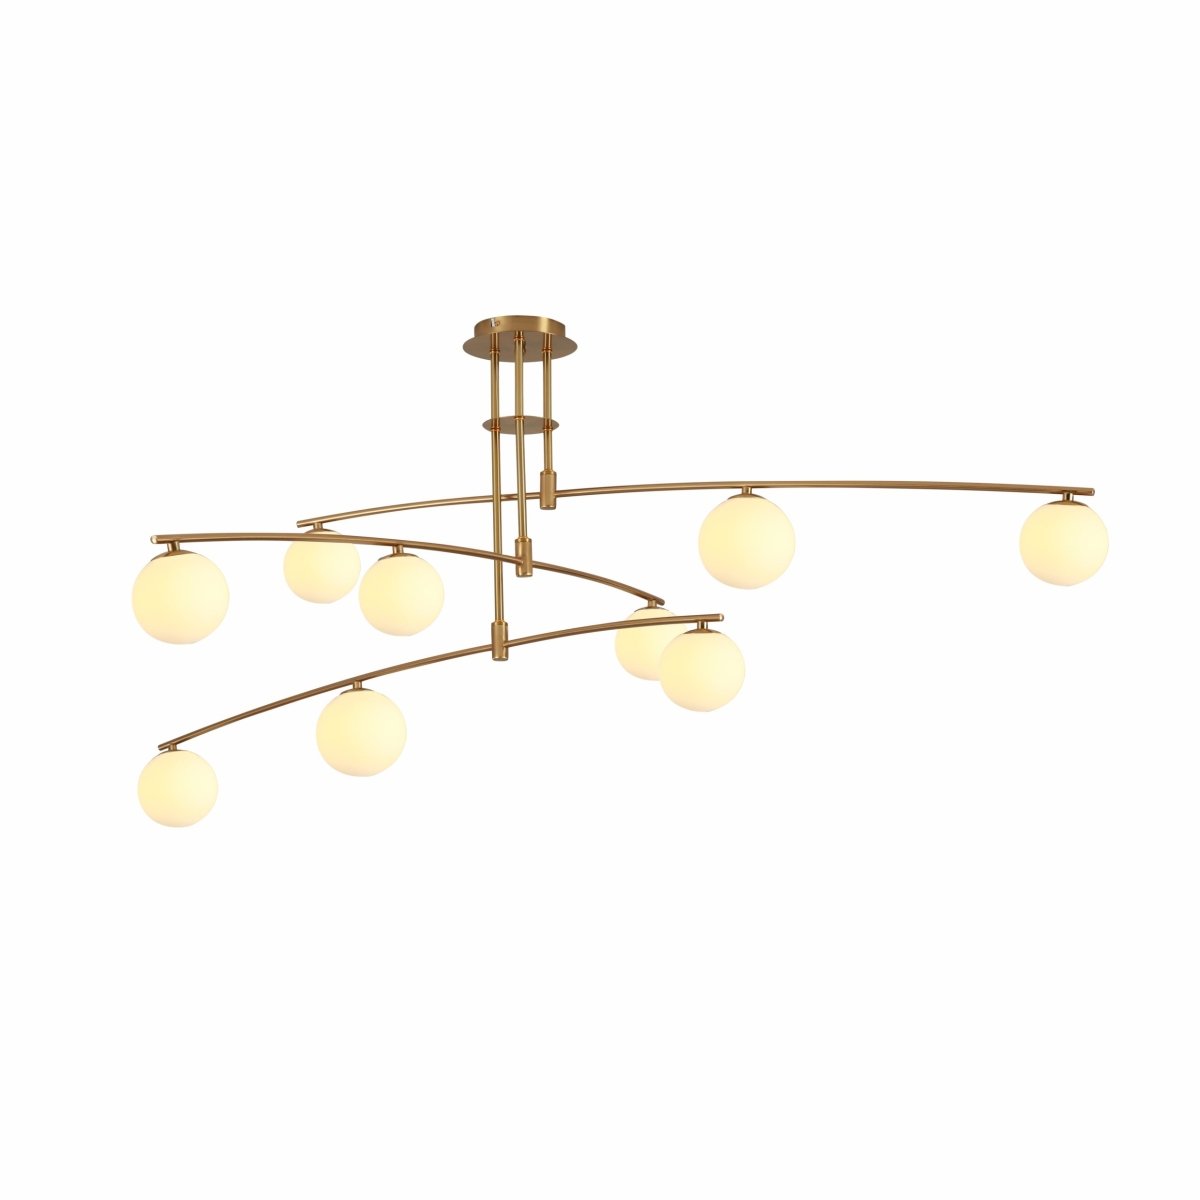 Main image of Balanced Palm Modern Chandelier with 9xG9 Fittings Opal Globes and Gold Body | TEKLED 159-17490